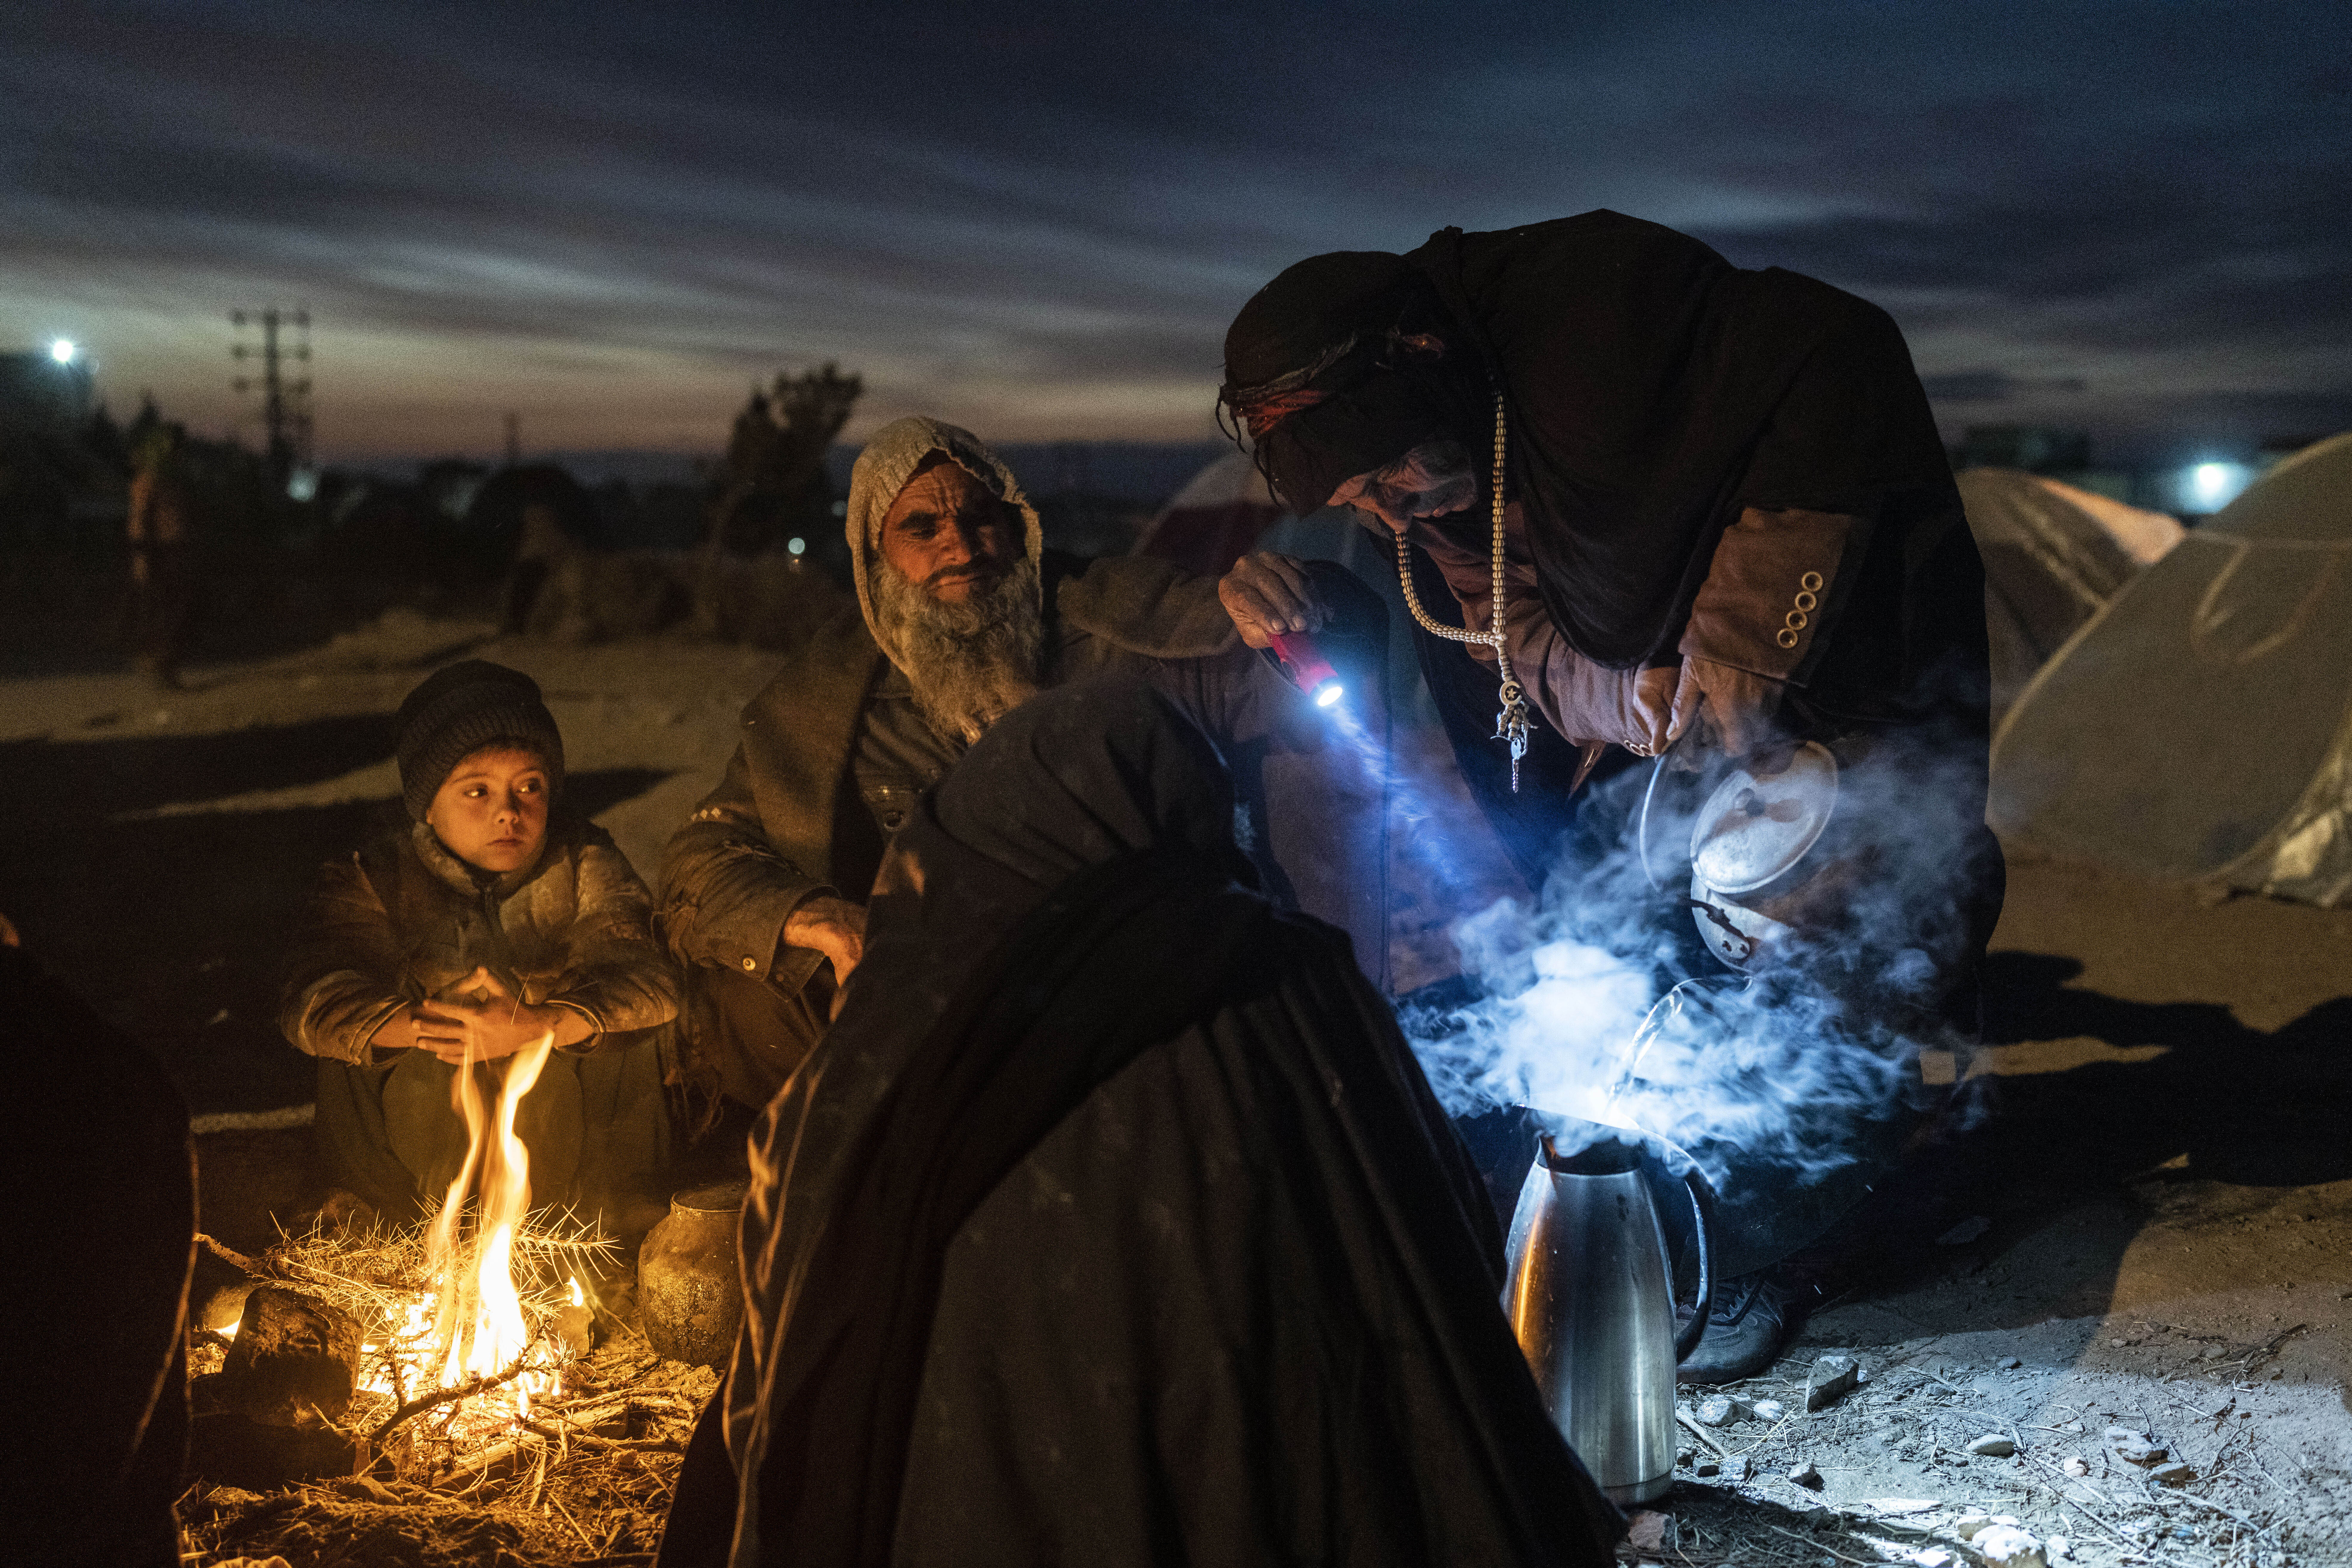 A family prepares tea outside the Directorate of Disaster office where they are camped, in Herat, Afghanistan, on Nov. 29, 2021. The United Nations is predicting that a record 274 million people — who together would amount to the world’s fourth most-popul